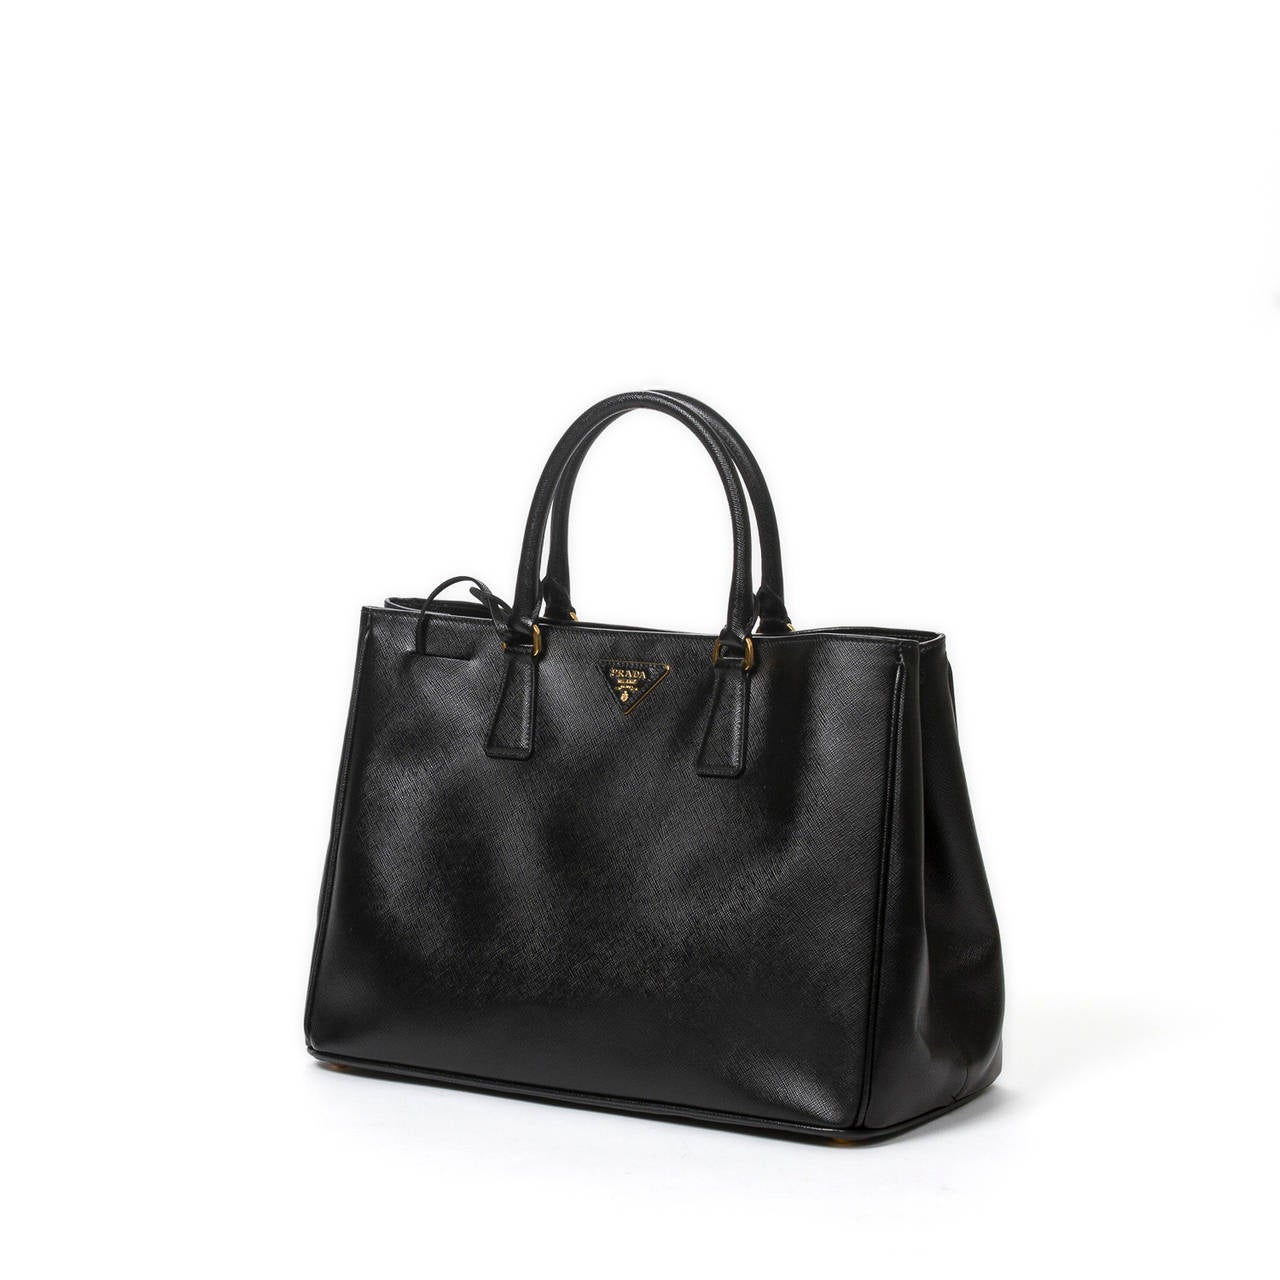 Prada Saffiano Lux handbag in black grained leather with key ring in clochette, gold tone hardware. Black jacquard canvas lining with 3 slip pockets and one zip pocket. Dustbag included. Very slight crease on leather, perfect condition.